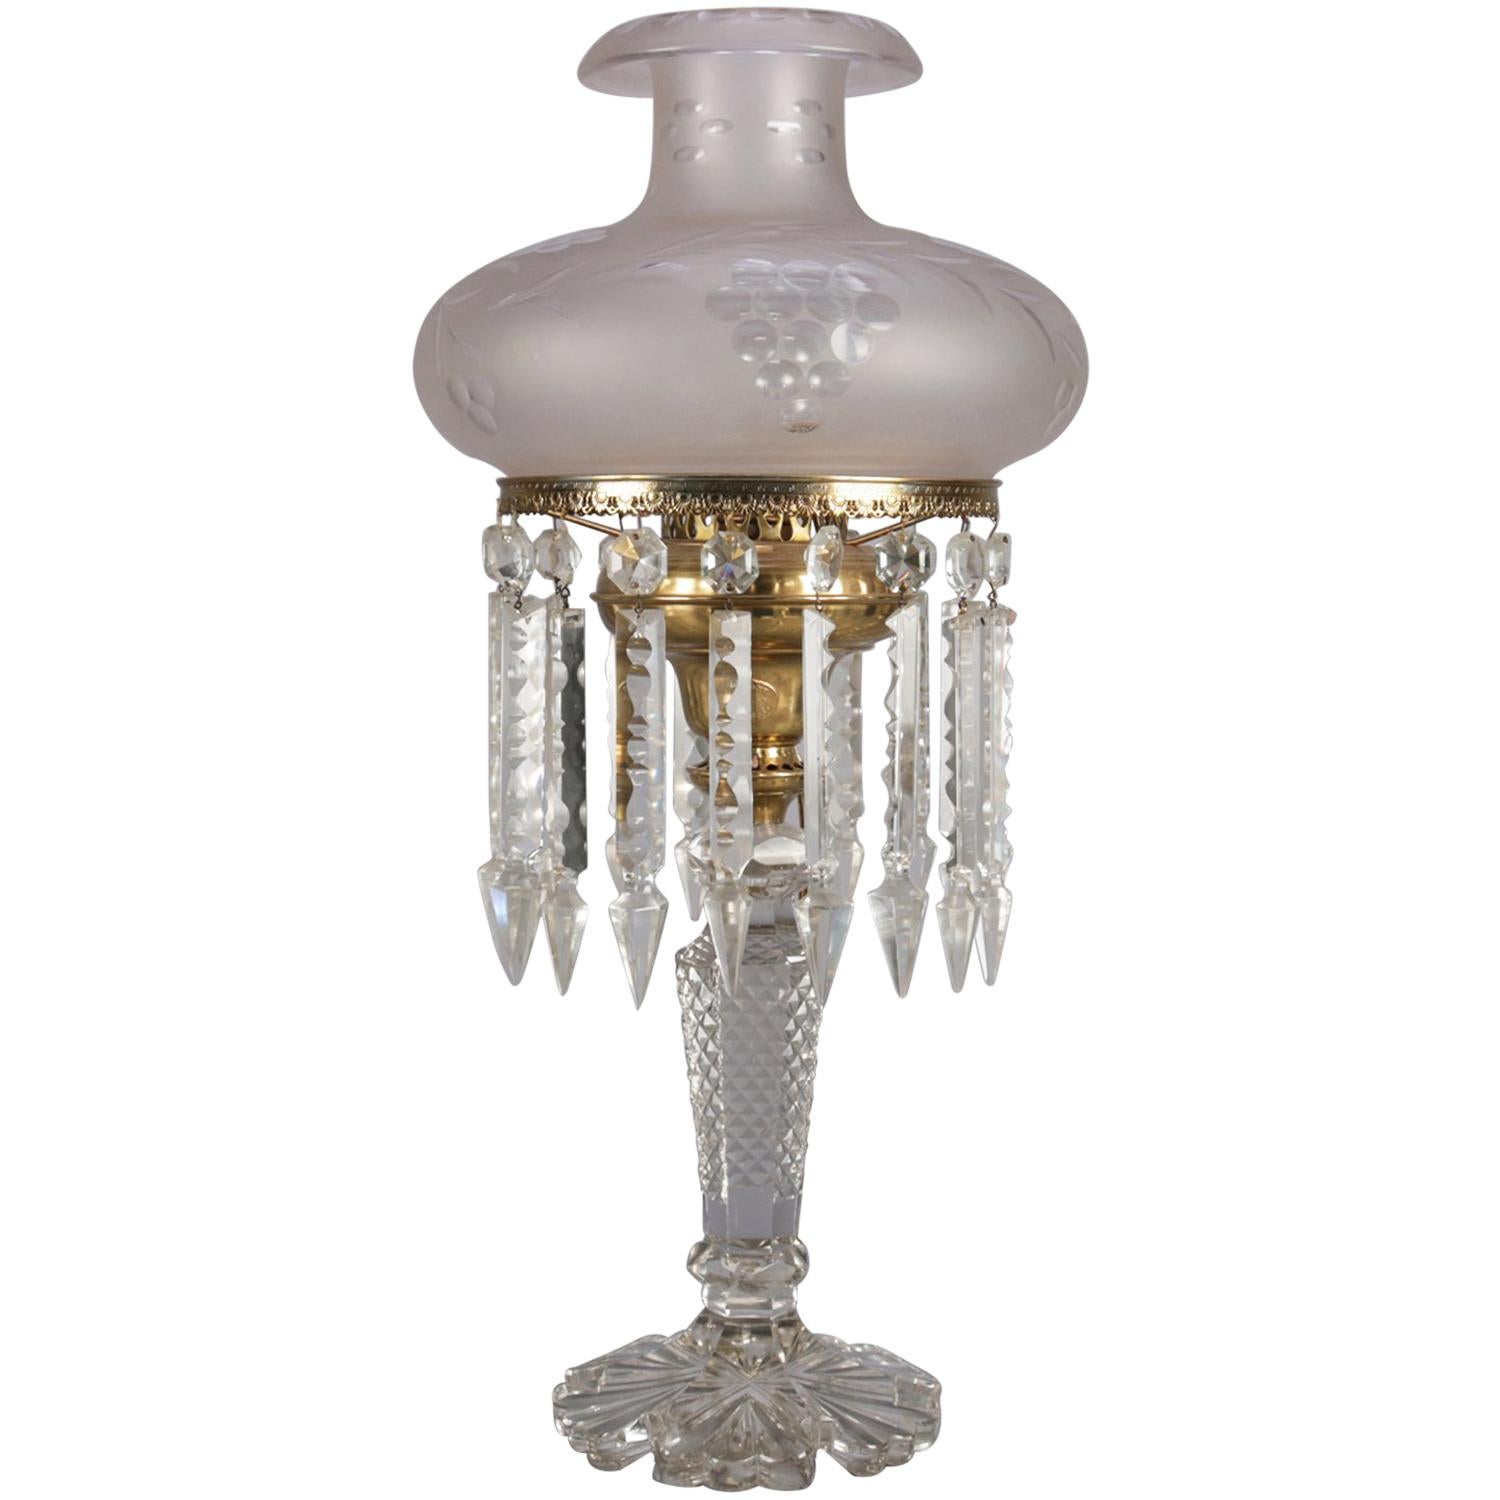 Antique Crystal & Brass J.G. Webb Electrified Solar Lamp with Prisms, circa 1840